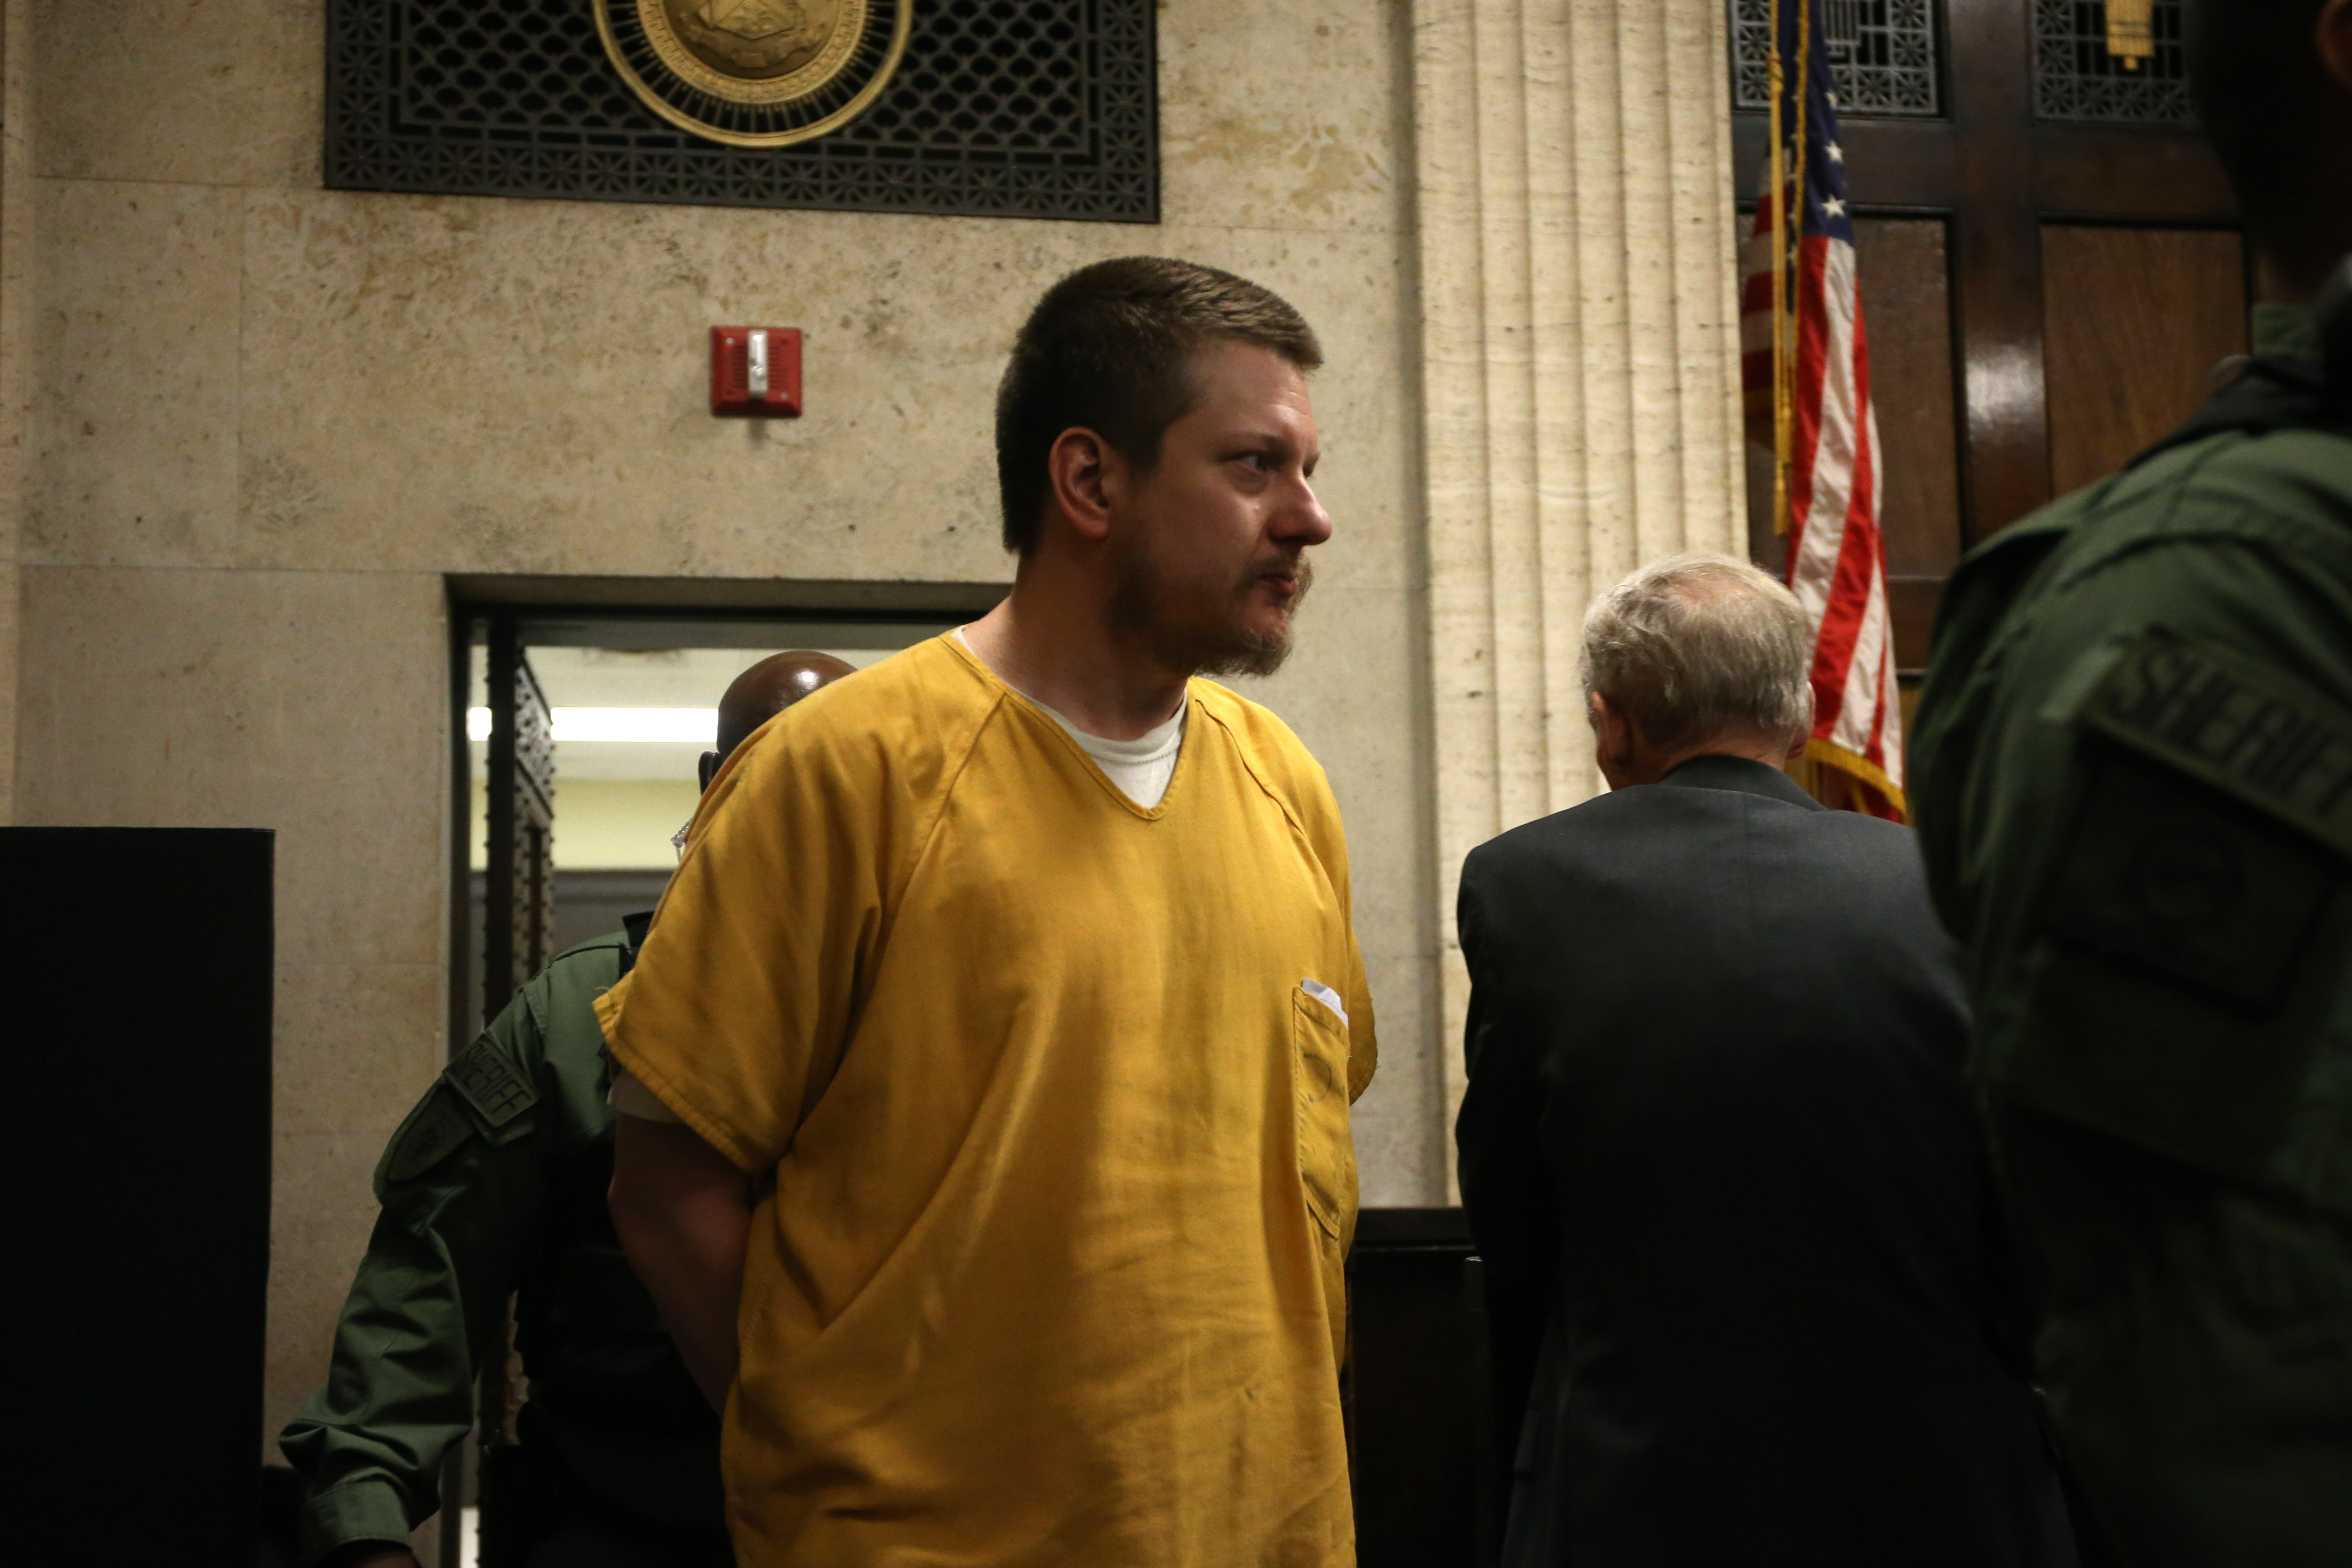 Jason Van Dyke enters the courtroom for his sentencing Jan. 18, 2019.